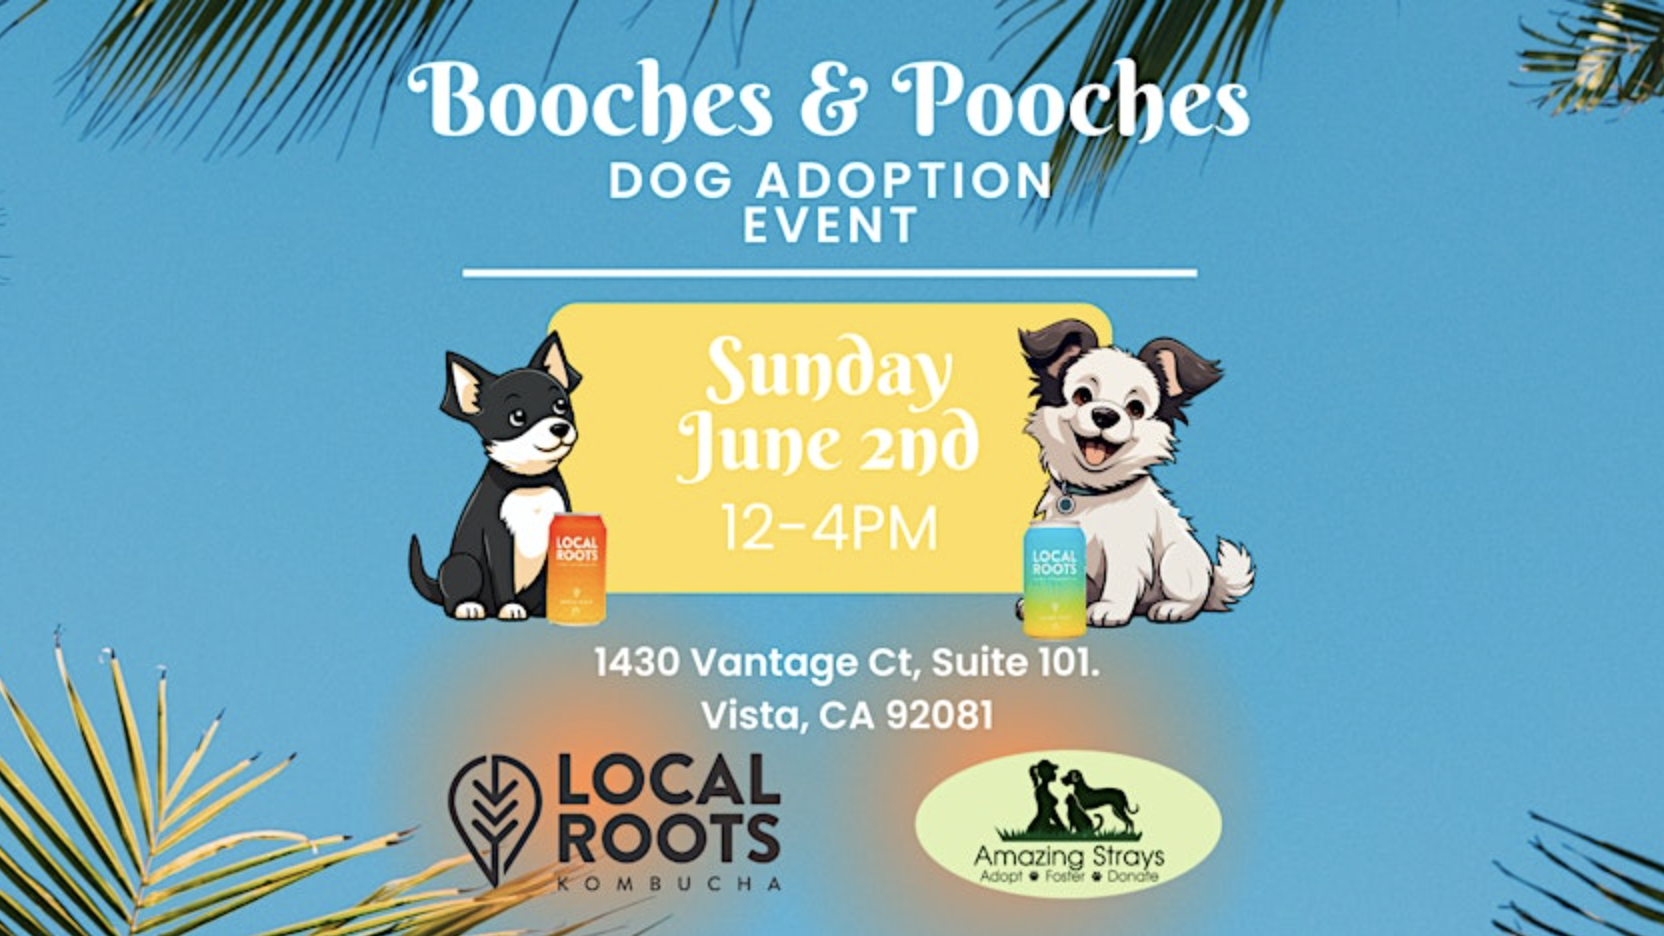 Promotional image for the Booches & Pooches Dog Adoption Event
Date: Sunday, June 2nd
Time: 12-4 PM
Location: 1430 Vantage Ct, Suite 101, Vista, CA 92081

Image includes:
- Cartoon dogs 
- Logos of Local Roots Kombucha and Amazing Strays
- Tropical leaves in the corners